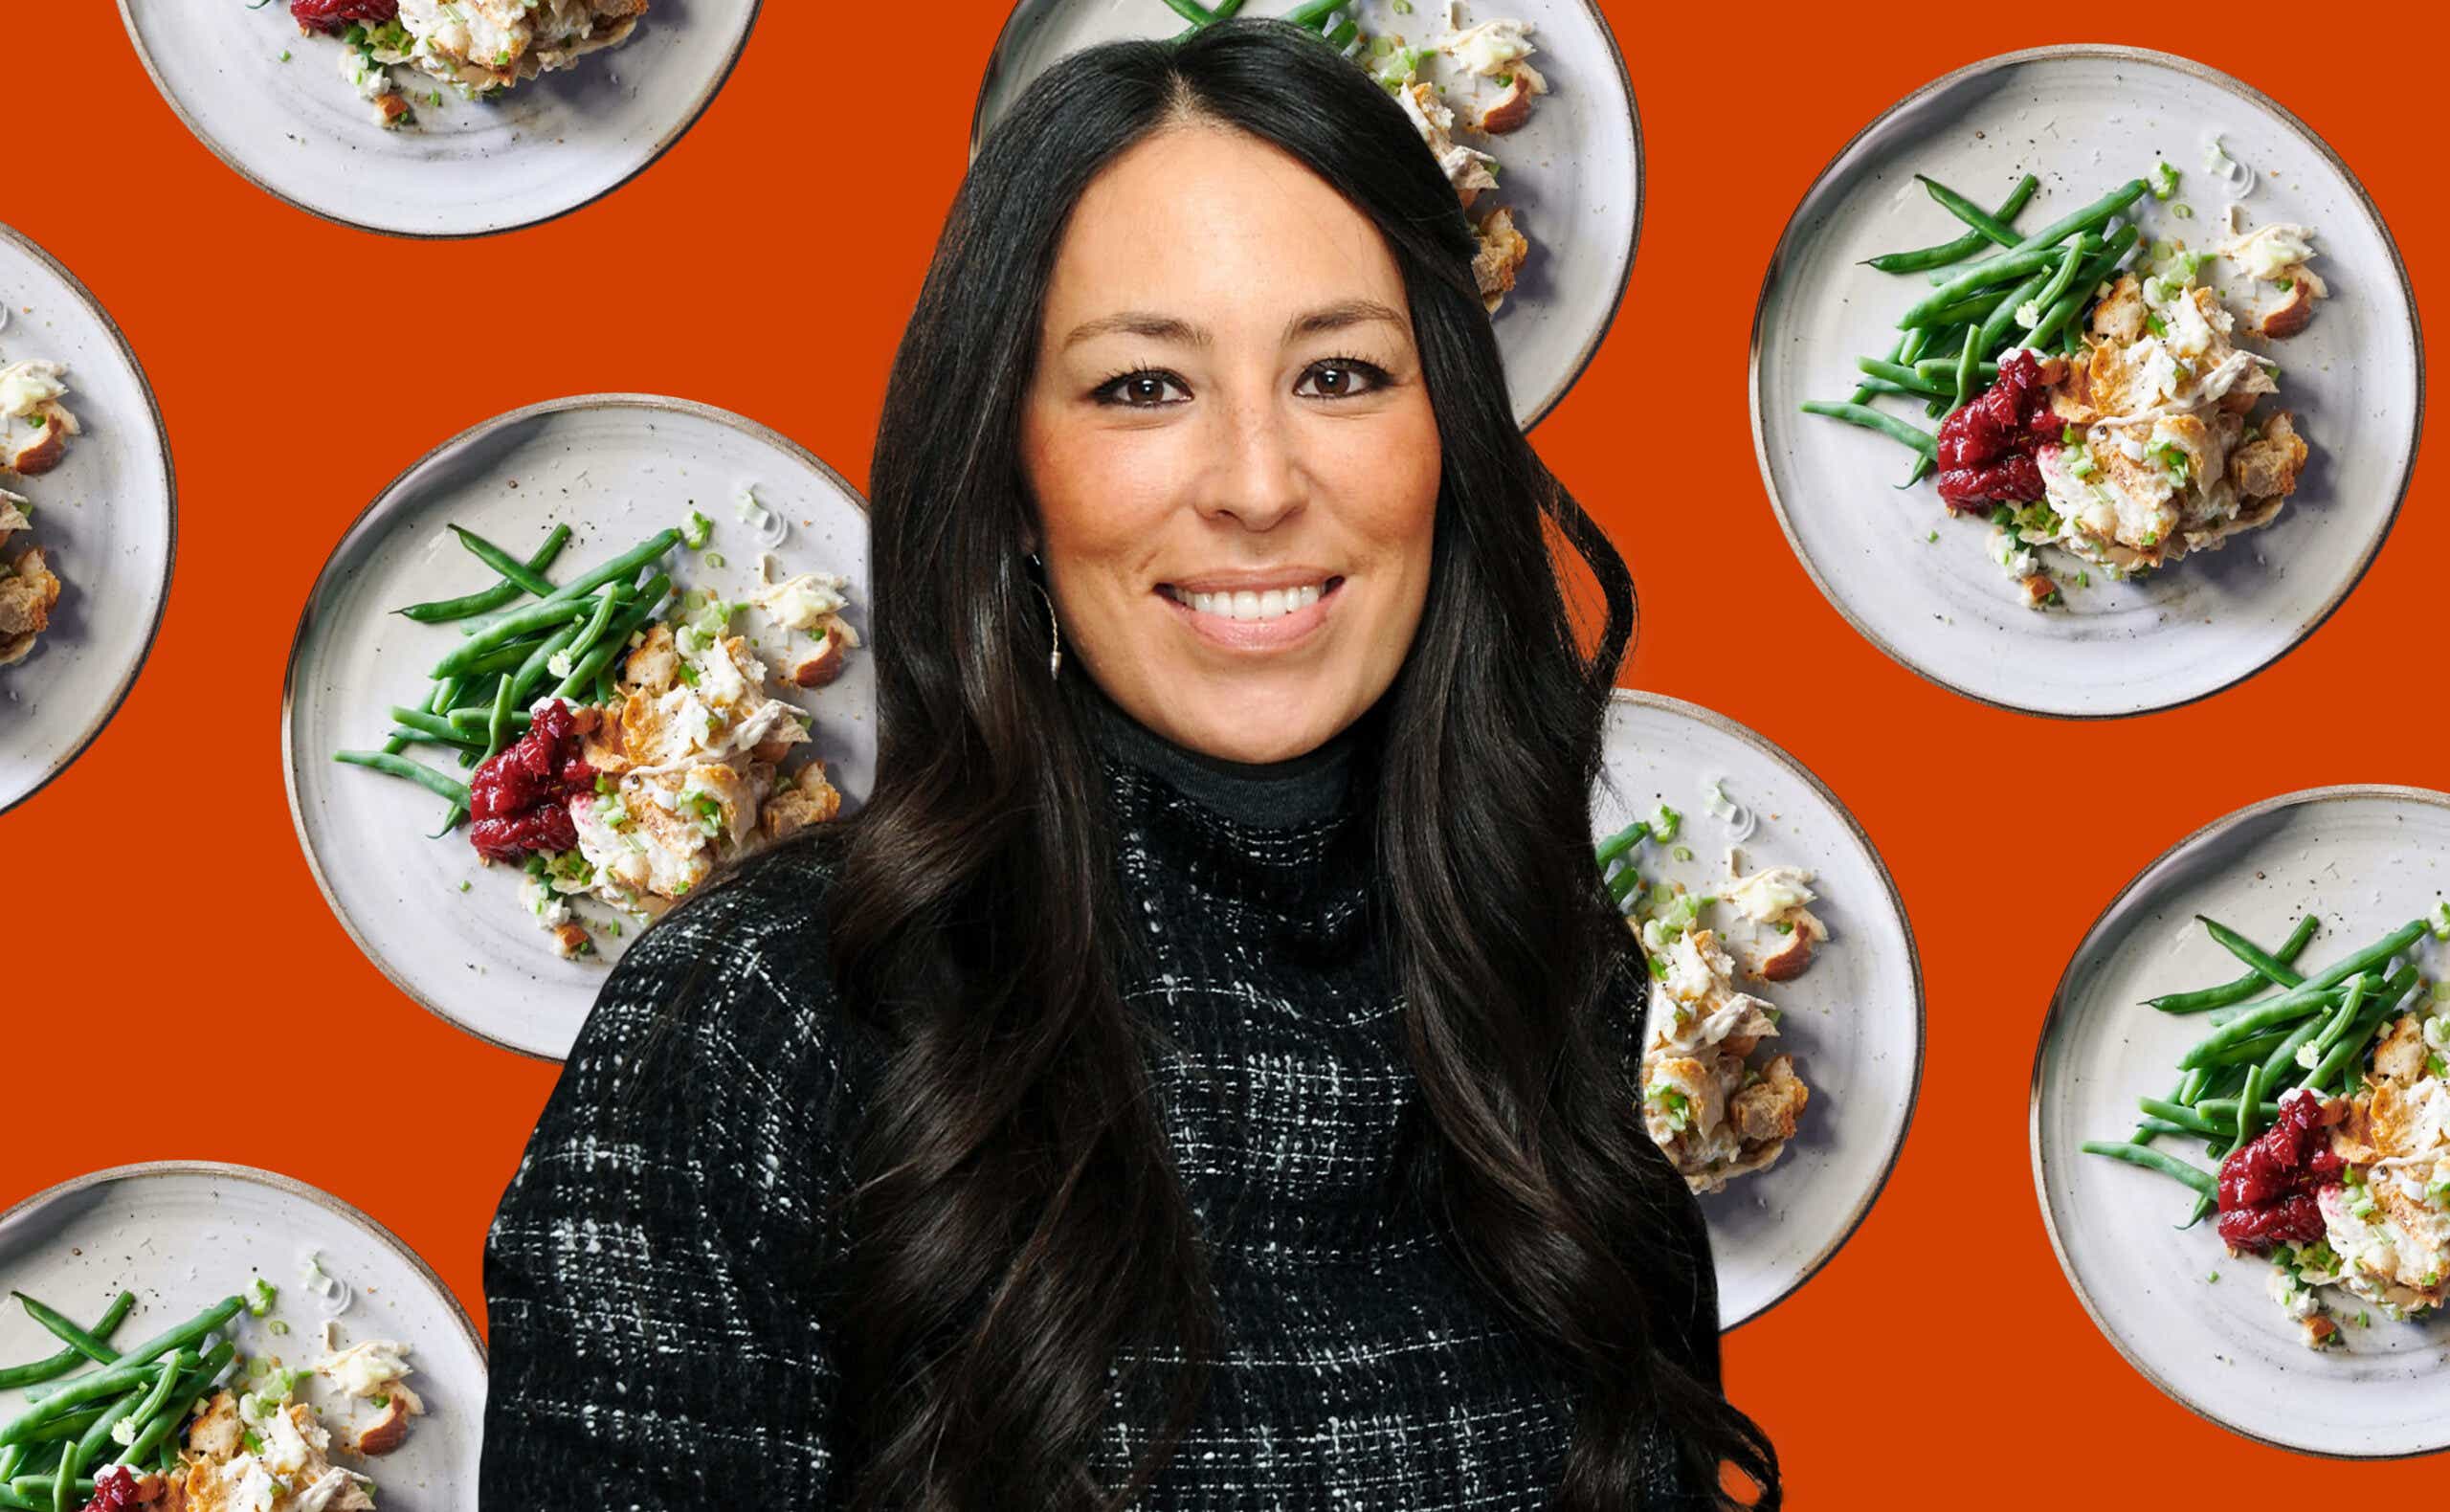 Joanna Gaines stands in front of a collaged background of plates of creamy chicken casserole.